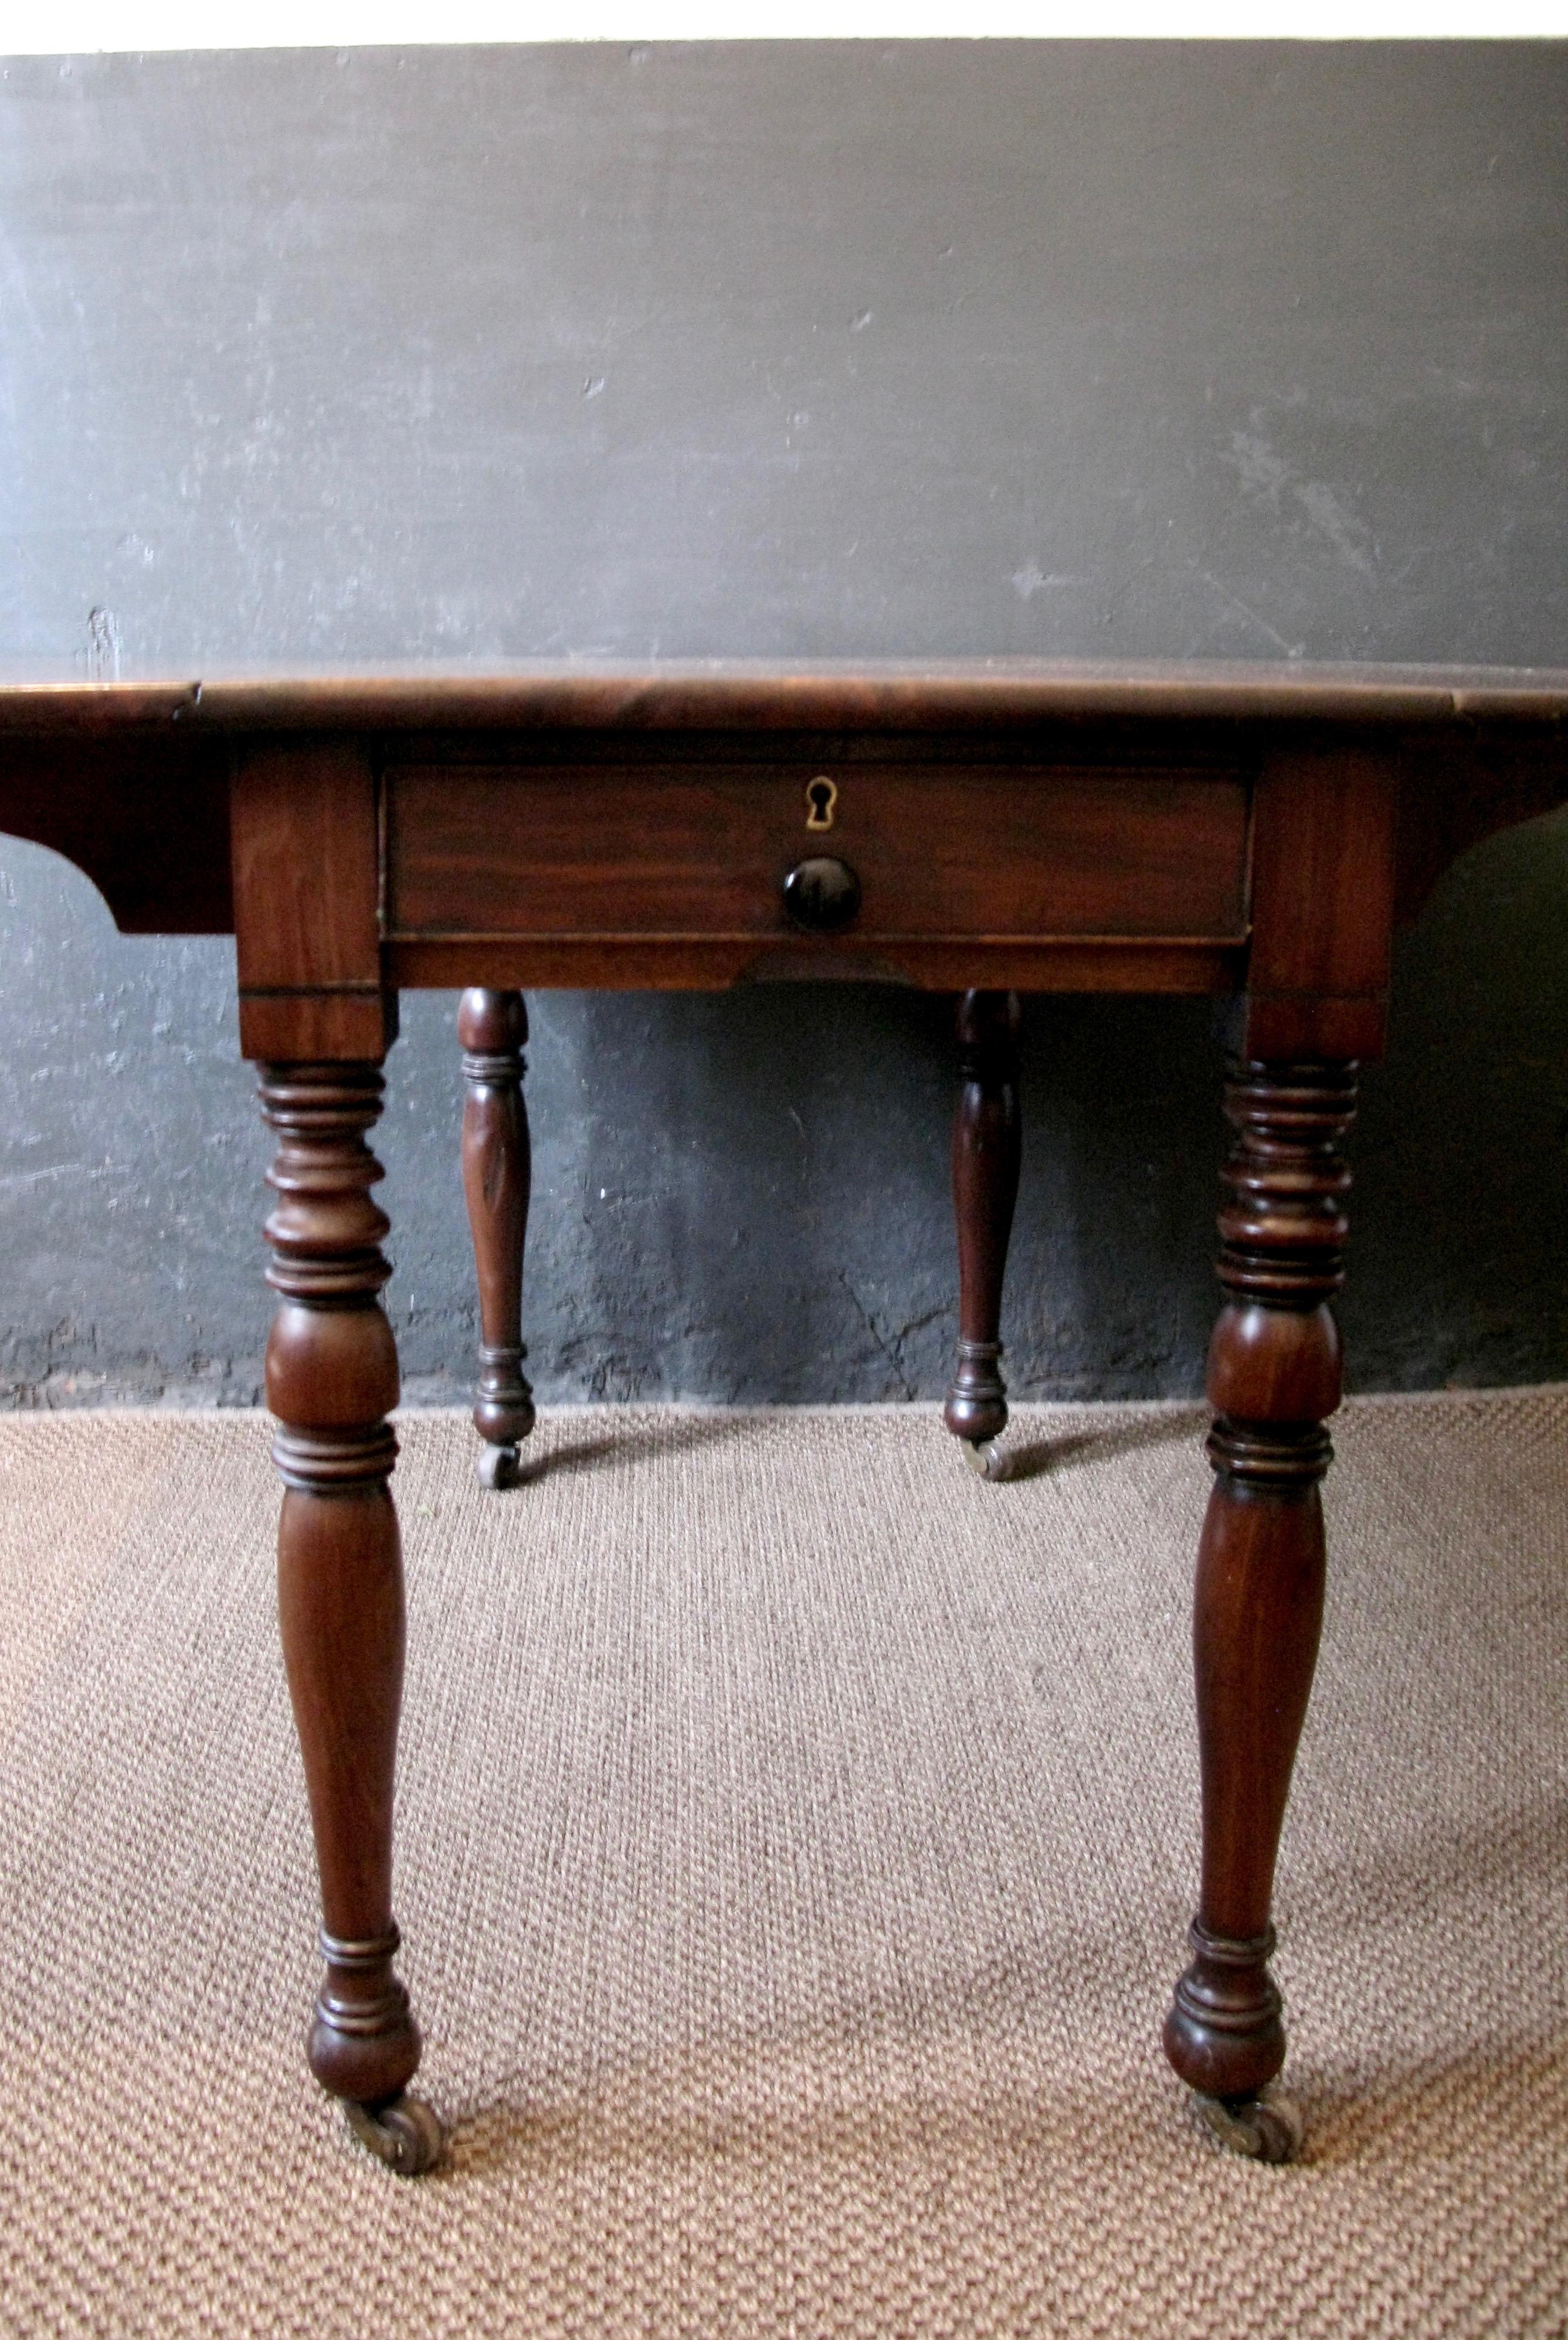 This is a lovely antique victorian pembroke large table.
 An English, early Victorian, flame mahogany, drop-flap side table dating to the early 19th century, having a lovely figured solid mahogany top with drop leafs, a single lined drawer at one